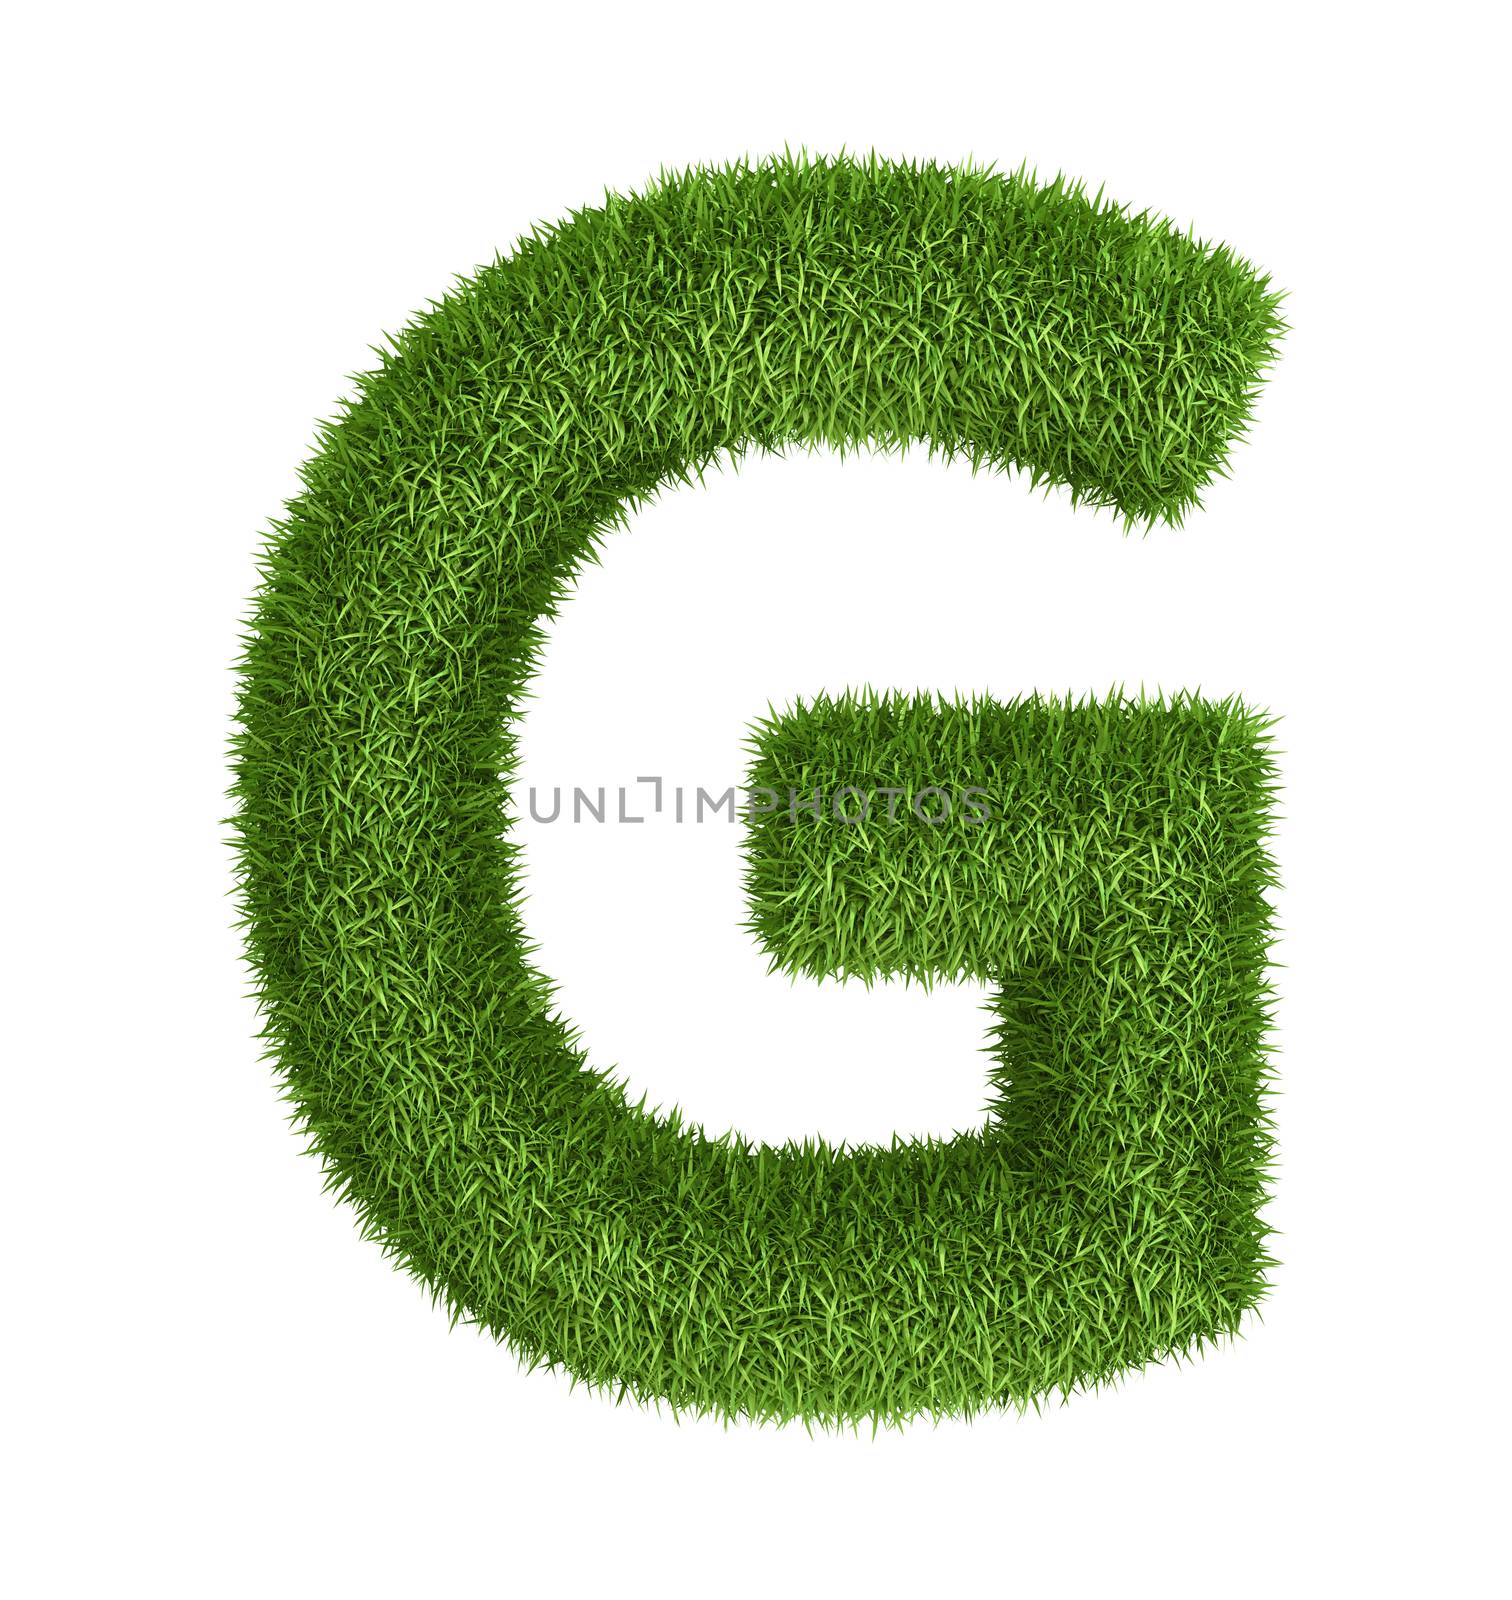 Natural grass letter G by iunewind